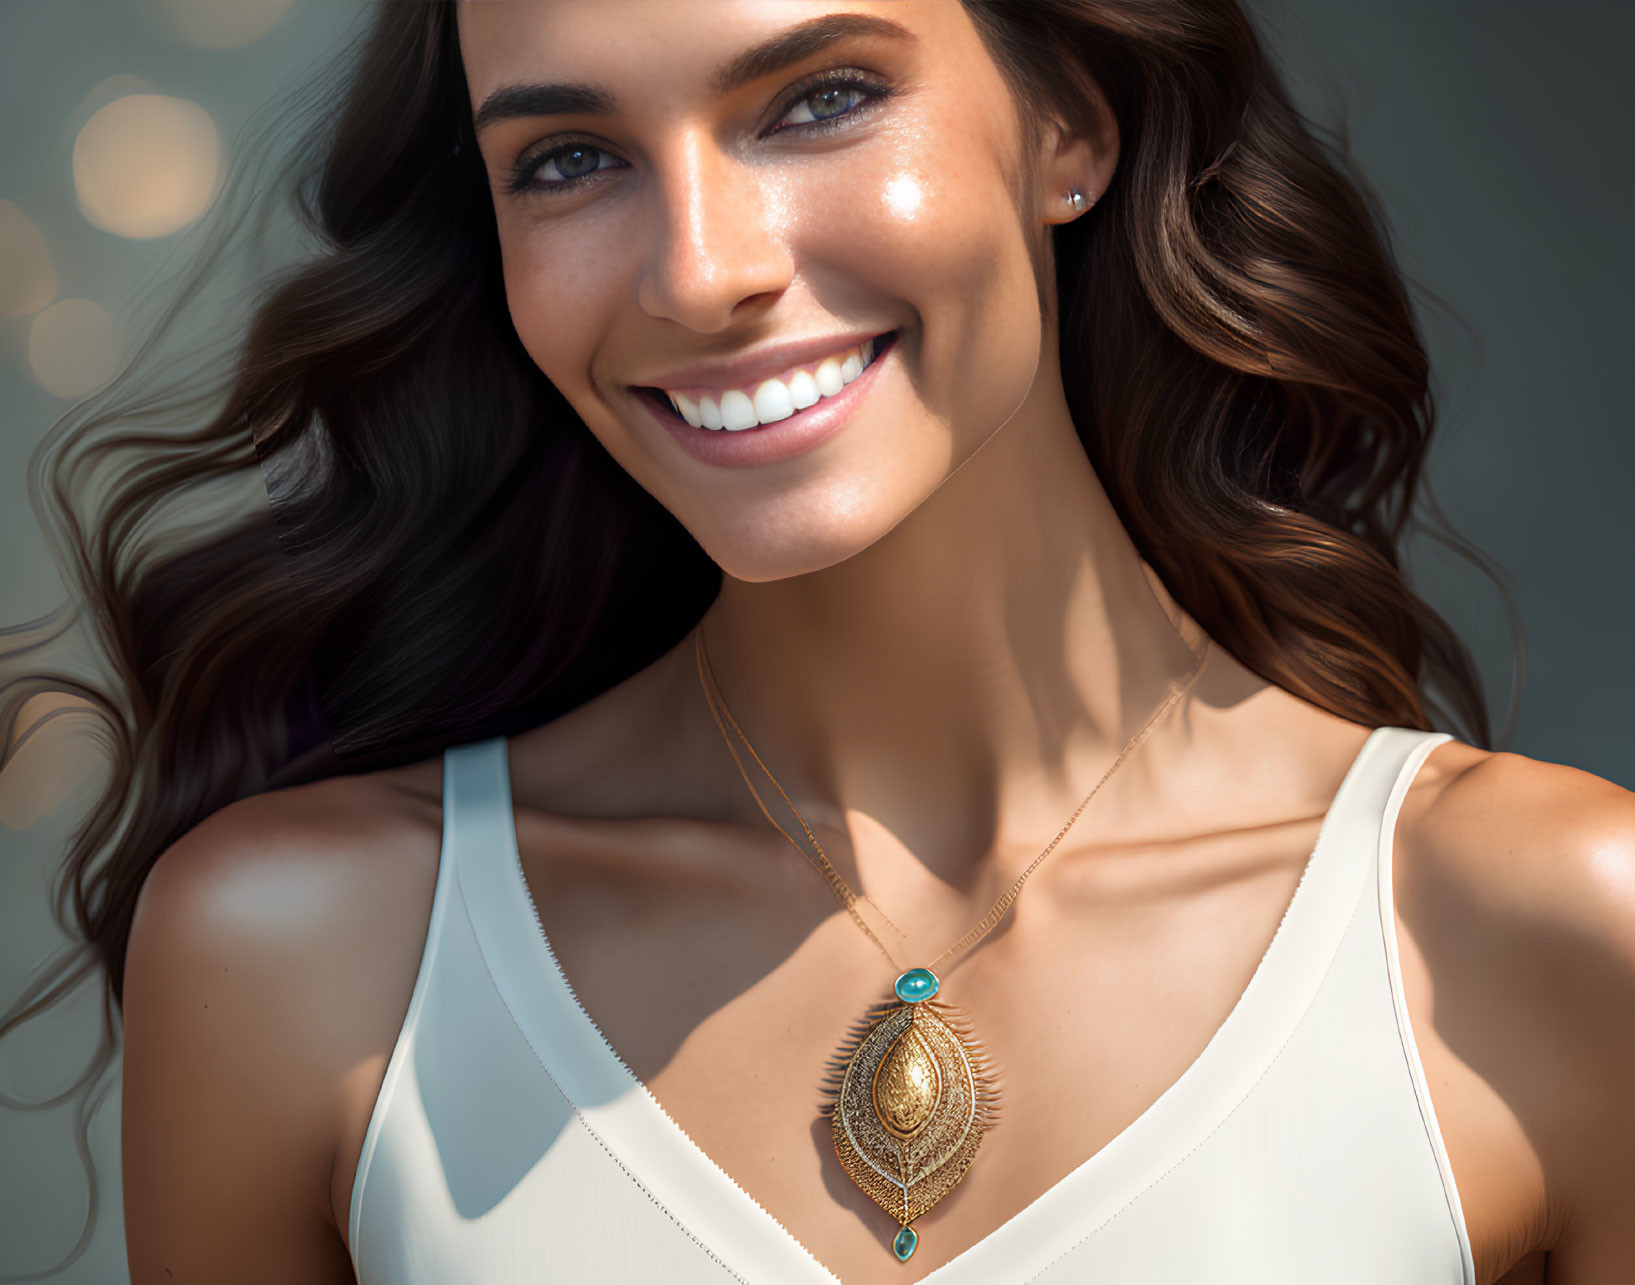 Smiling woman in white top with ornate necklace and bokeh lights